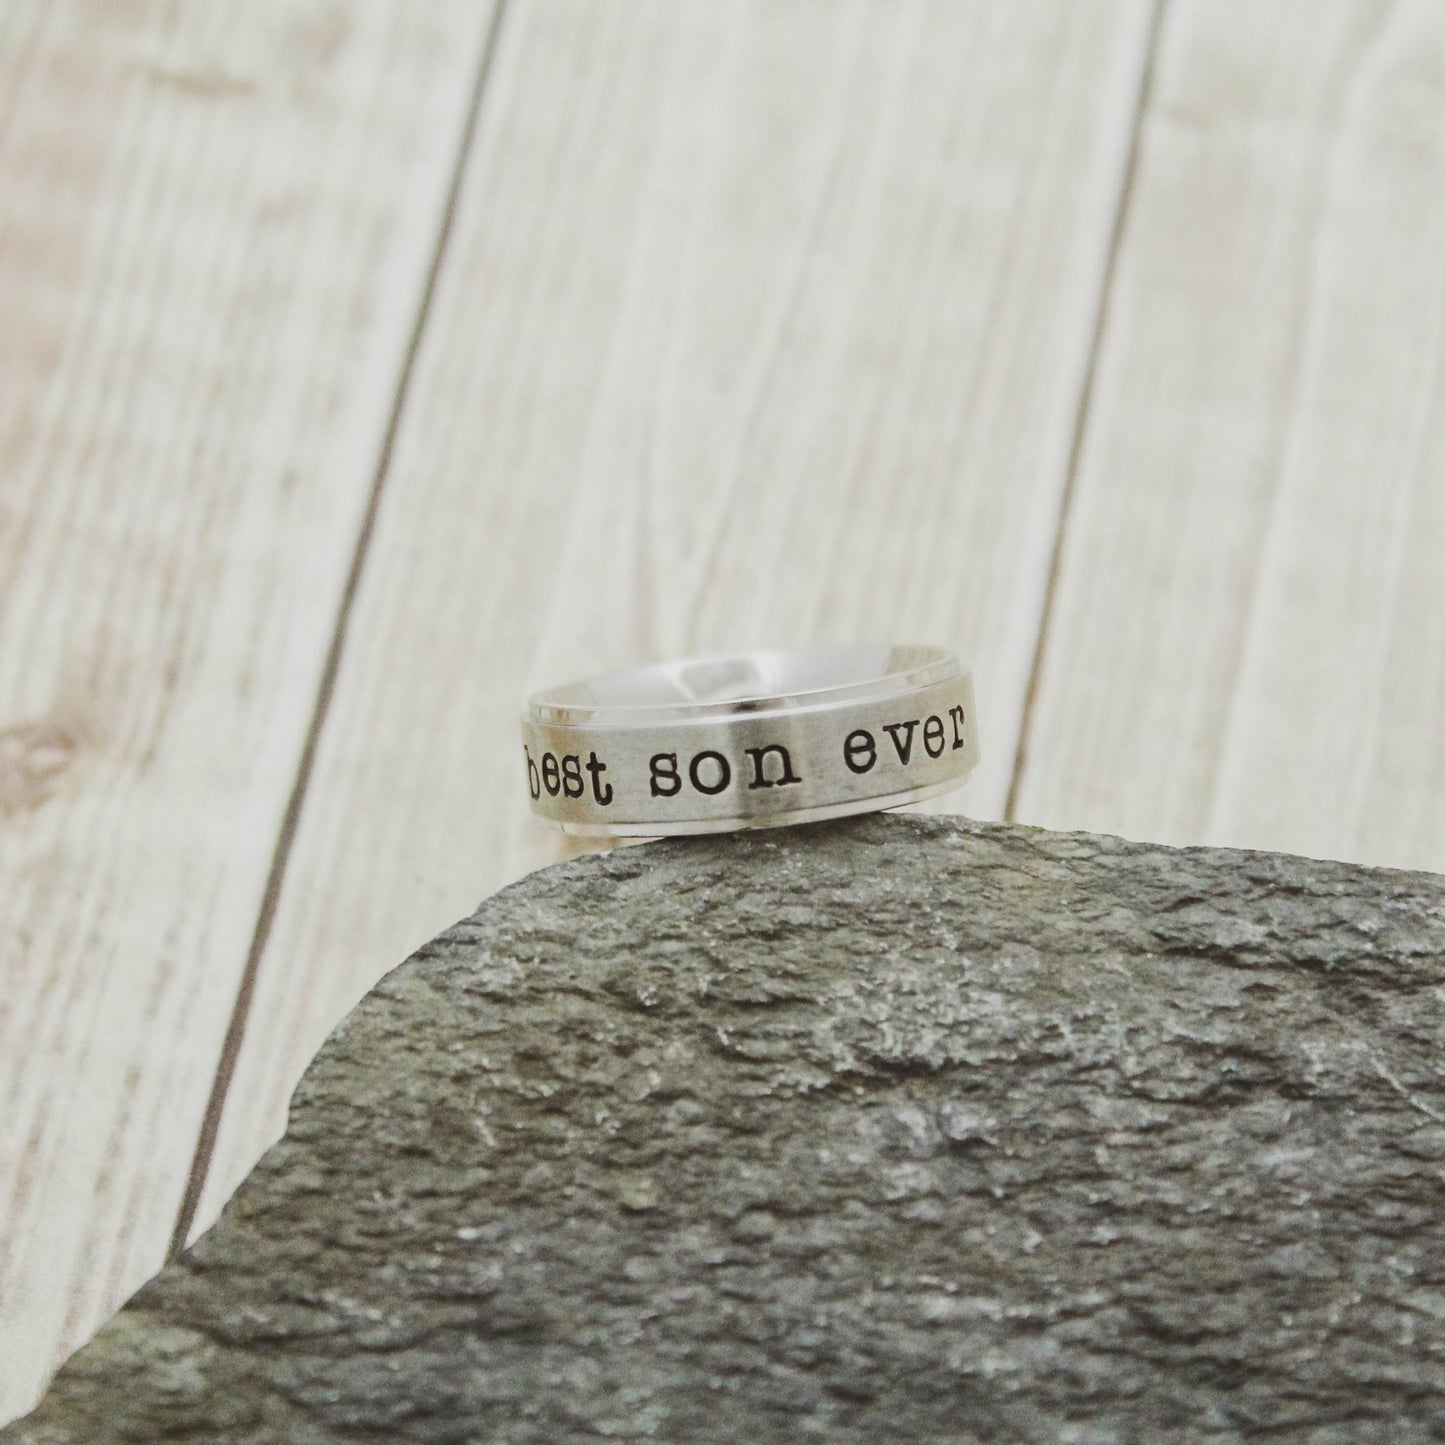 Best SON Ever Personalized Ring, Customized Silver Ring, Gift for Son, Hand Stamped Stainless Steel Name Ring, Shiny Silver Custom Ring